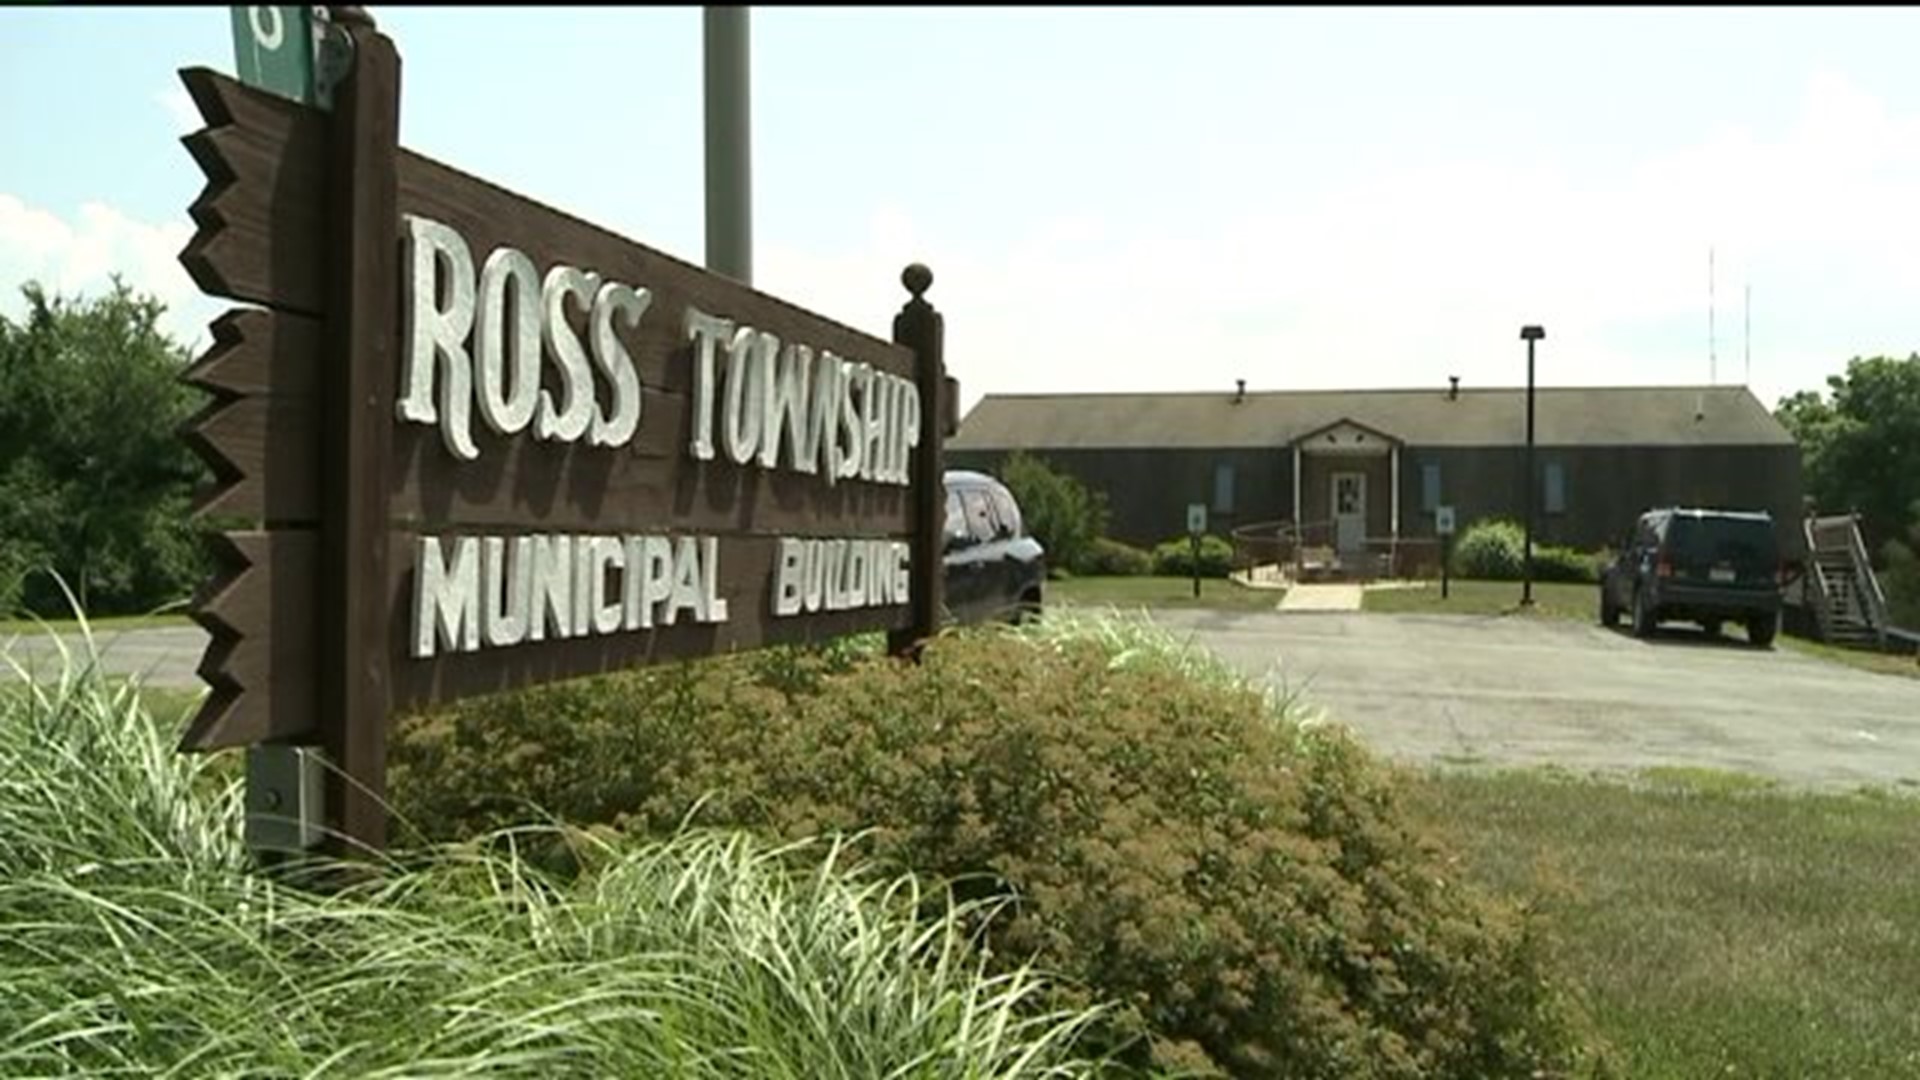 Ross Township Shooting: One Year Later